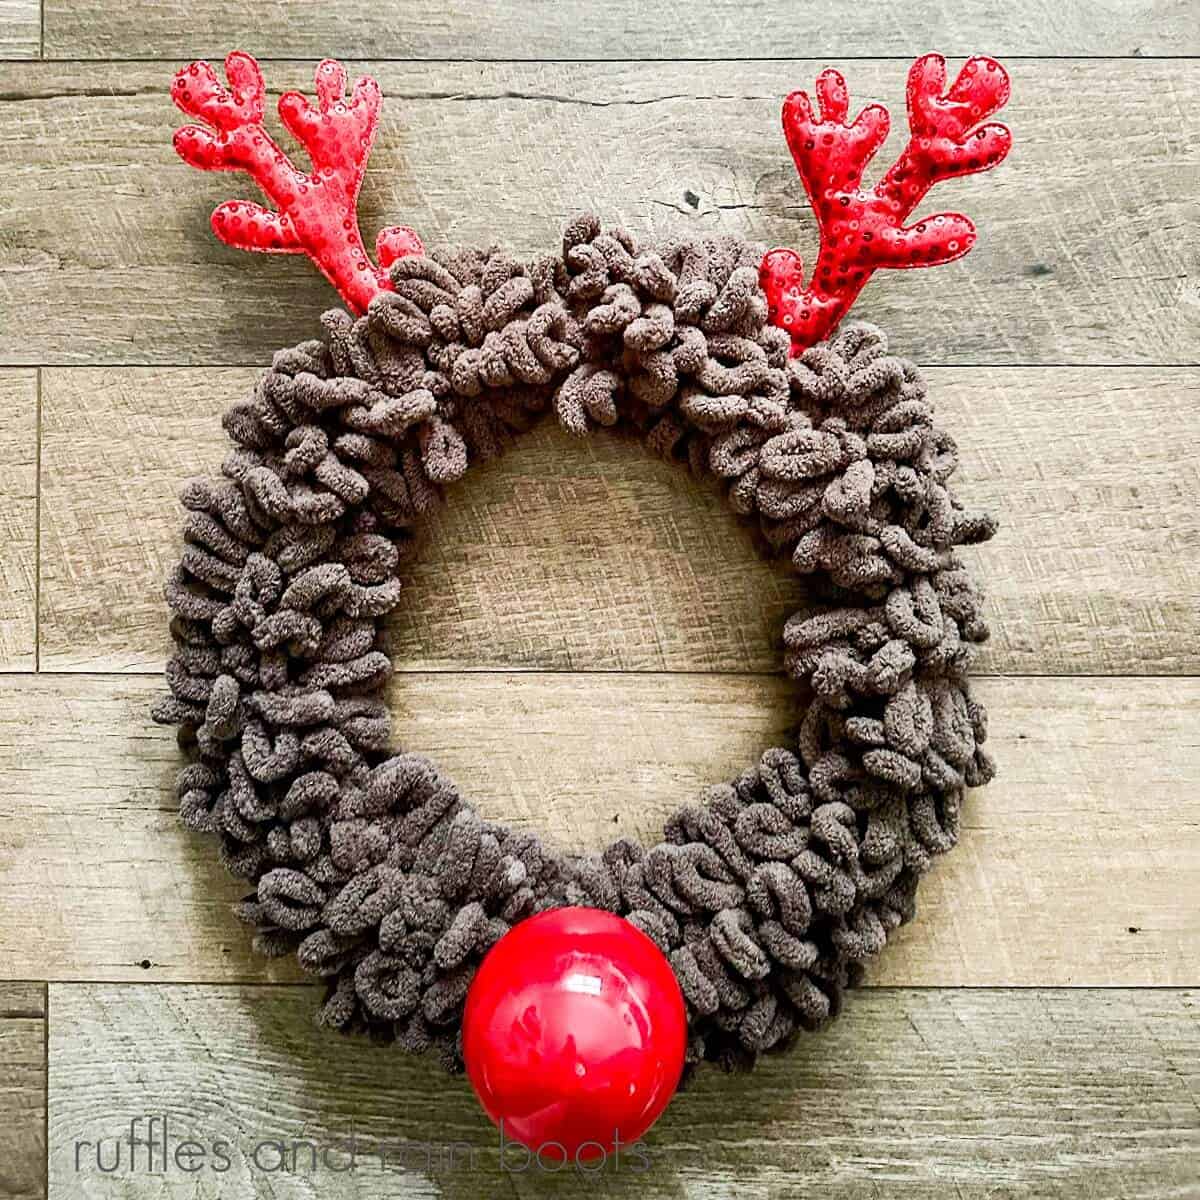 A square image with a yarn reindeer wreath against a wooden background.